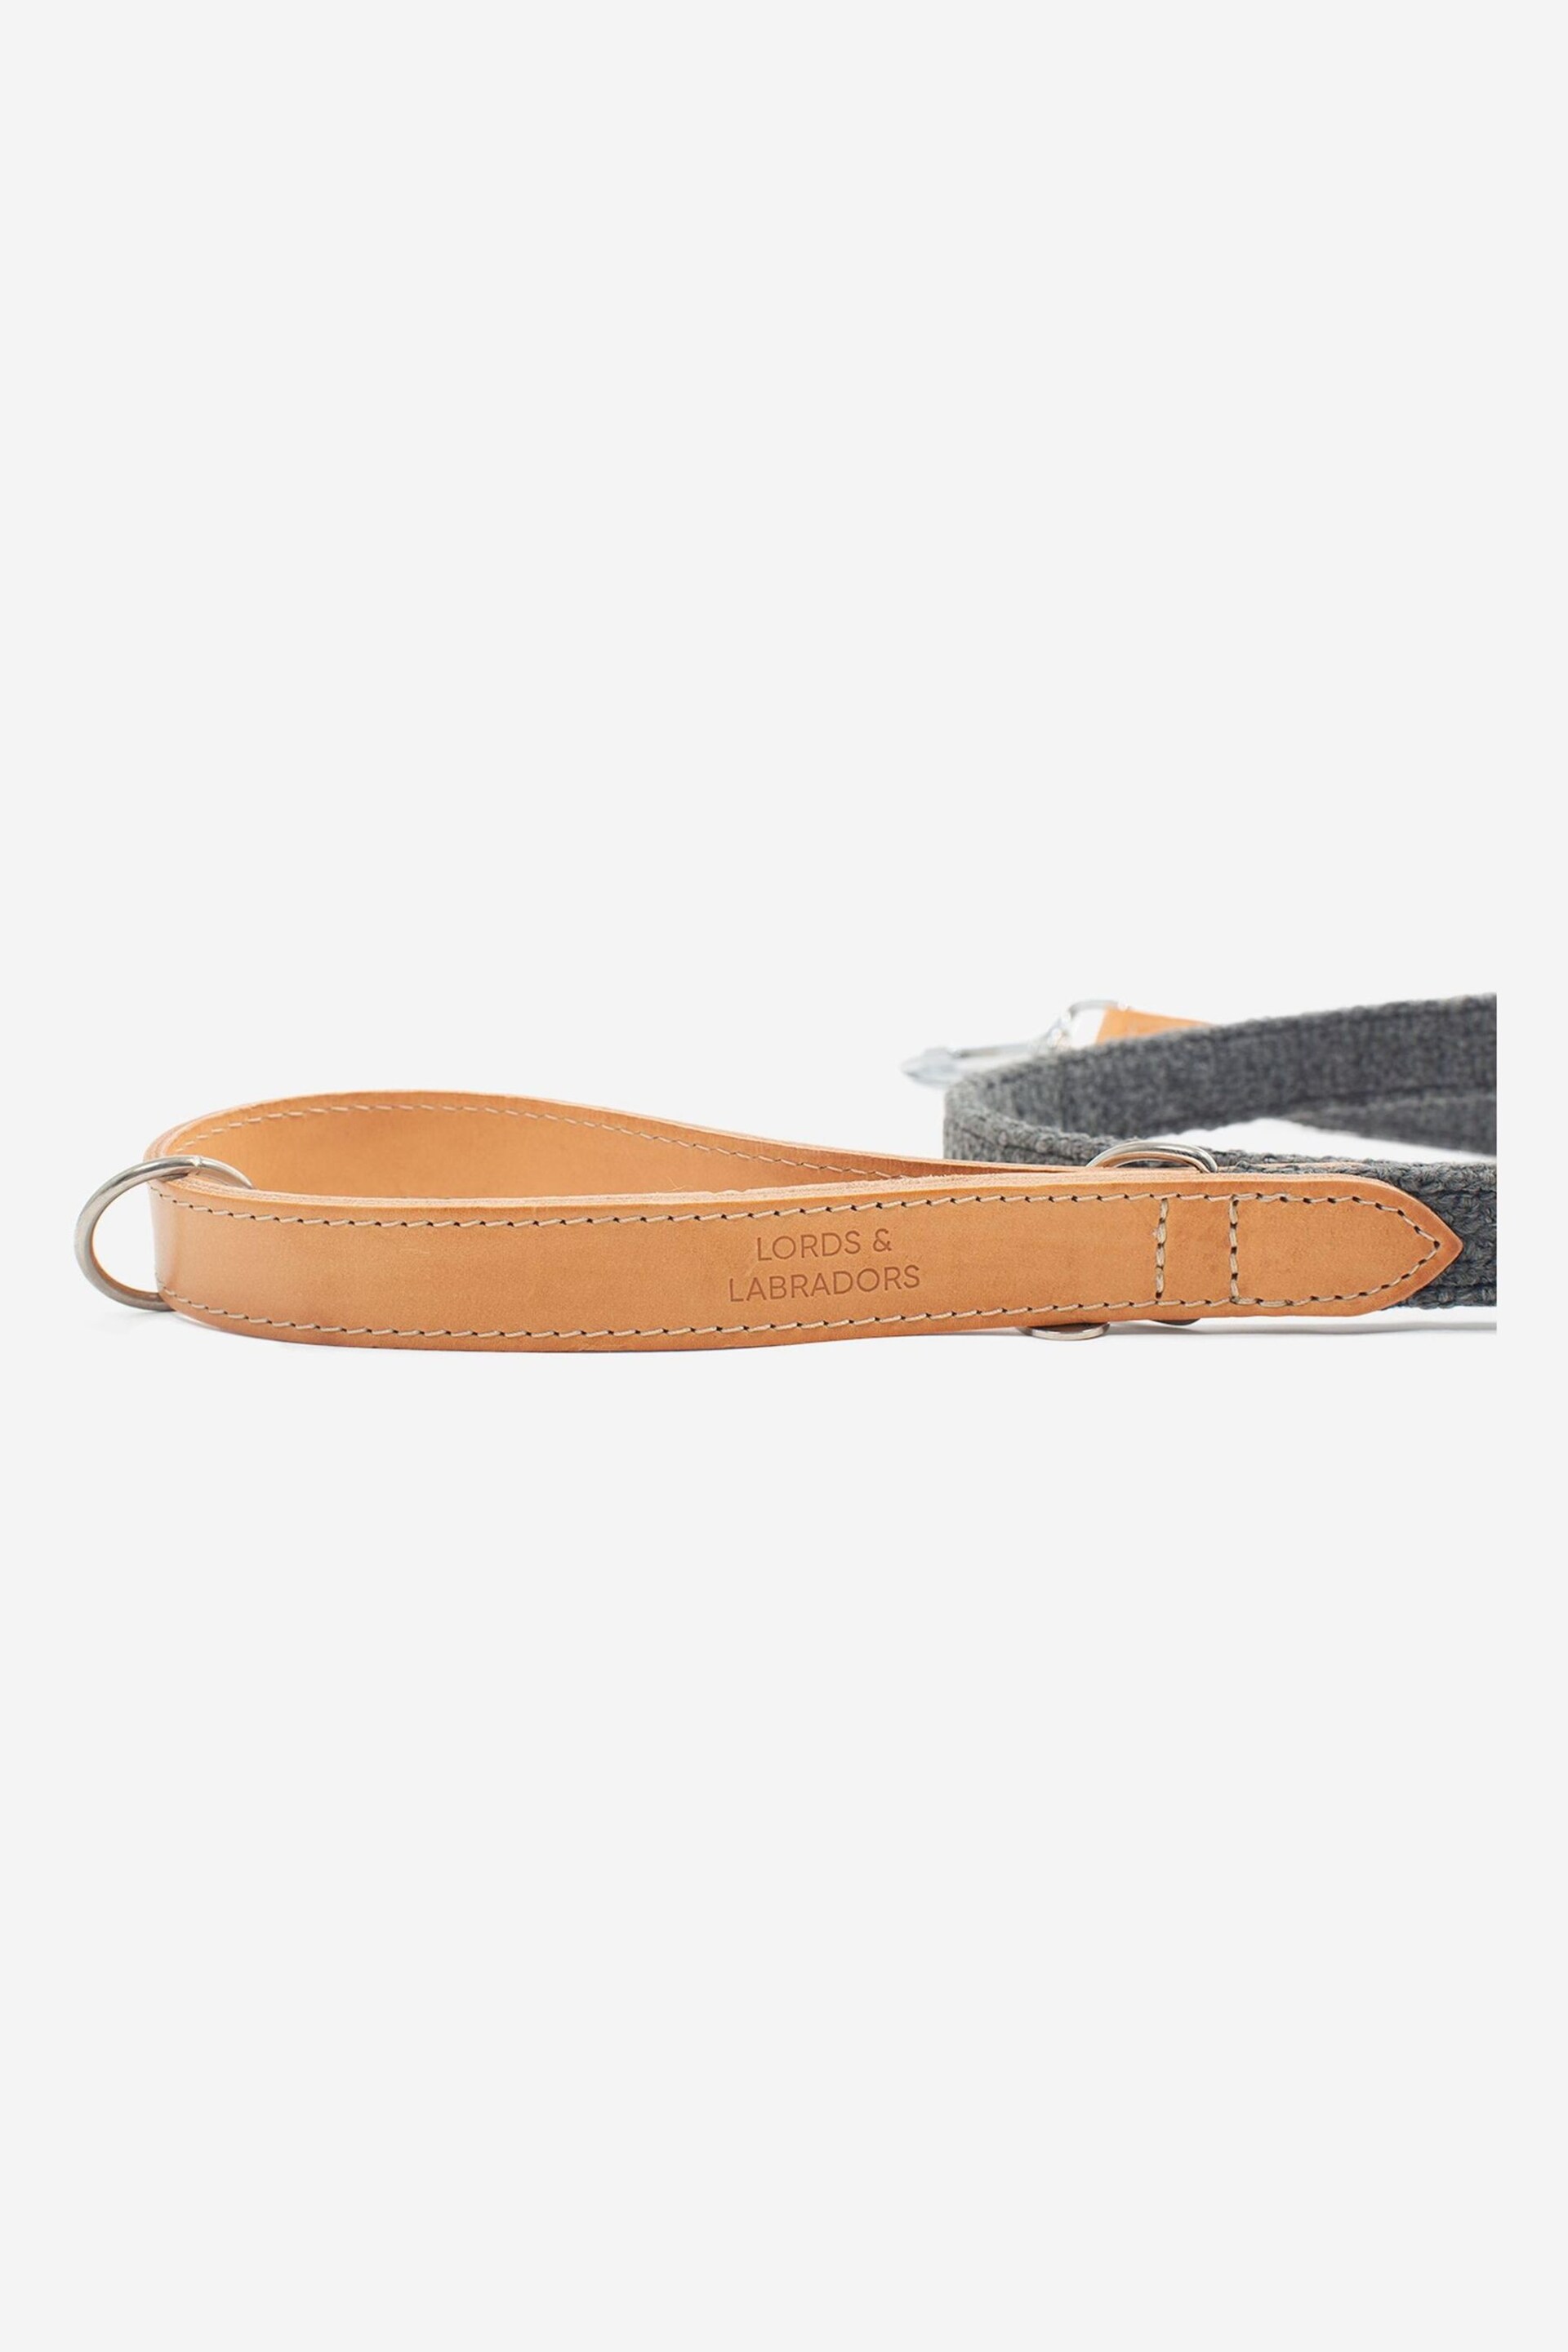 Lords and Labradors Graphite Essentials Herdwick Dog Lead - Image 5 of 7